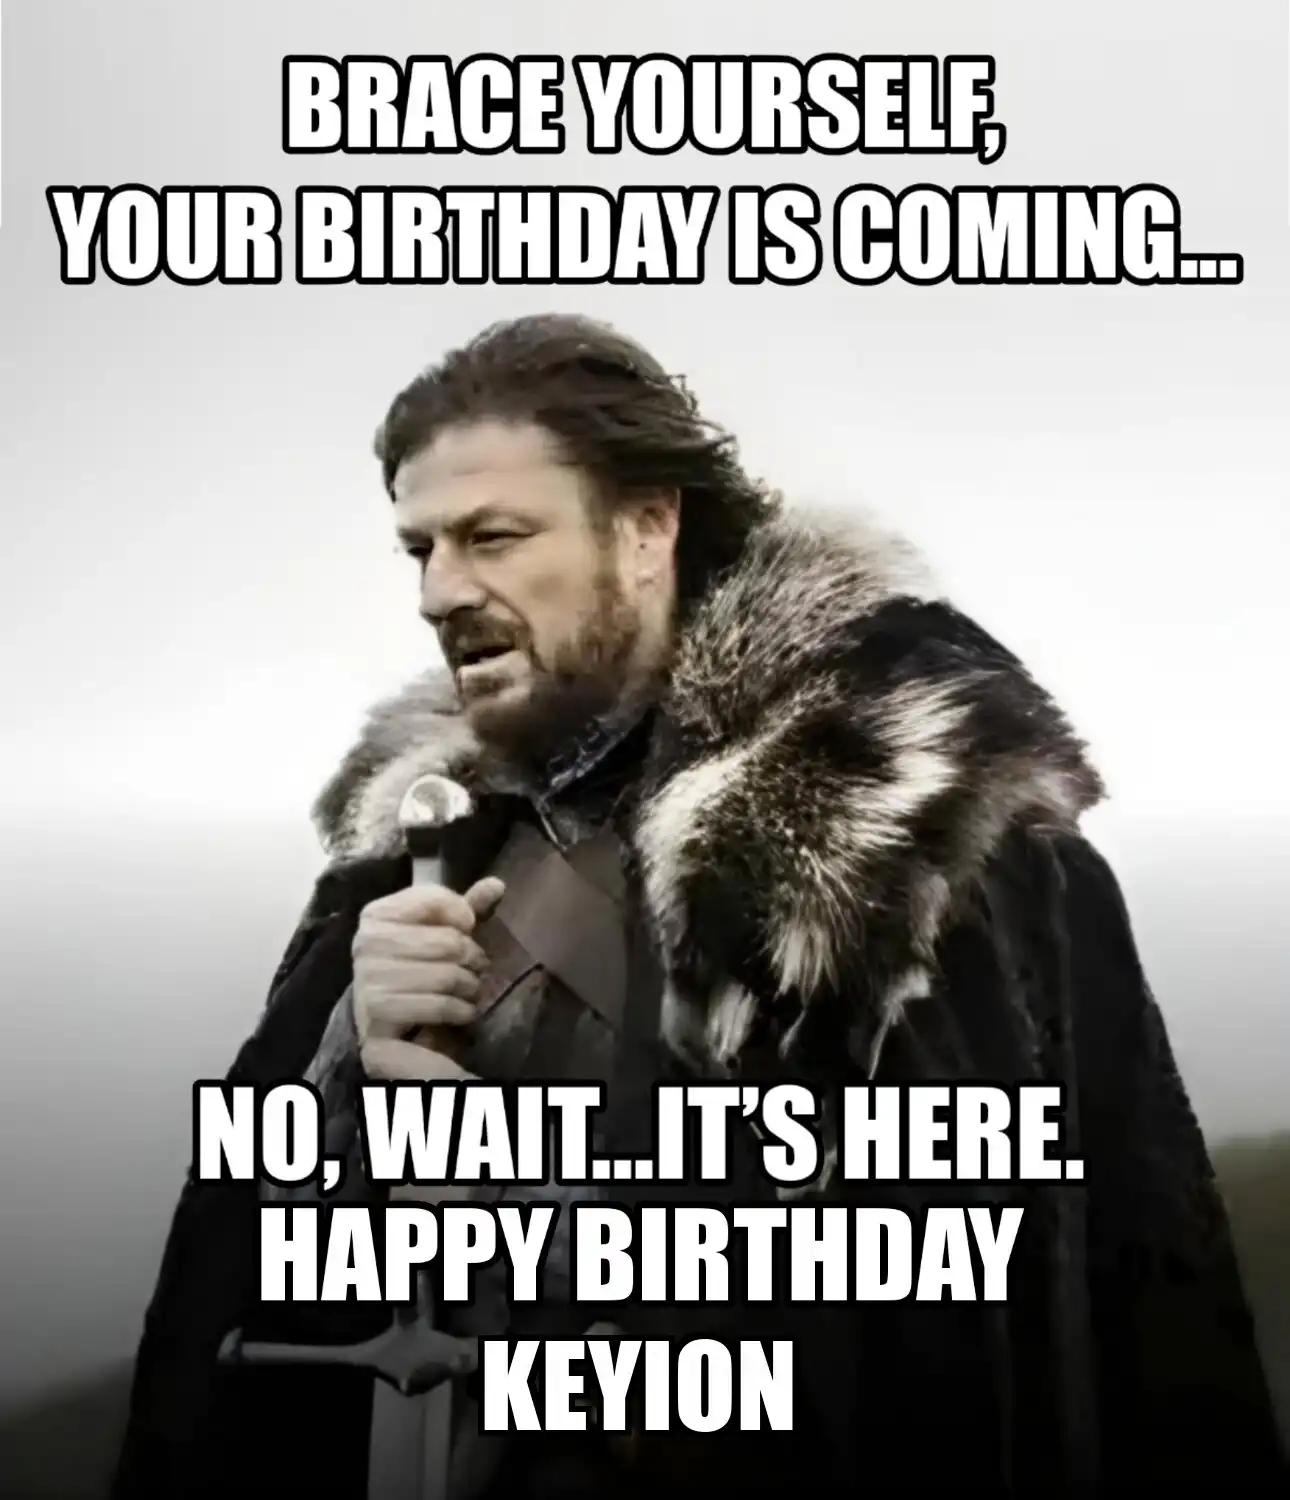 Happy Birthday Keyion Brace Yourself Your Birthday Is Coming Meme